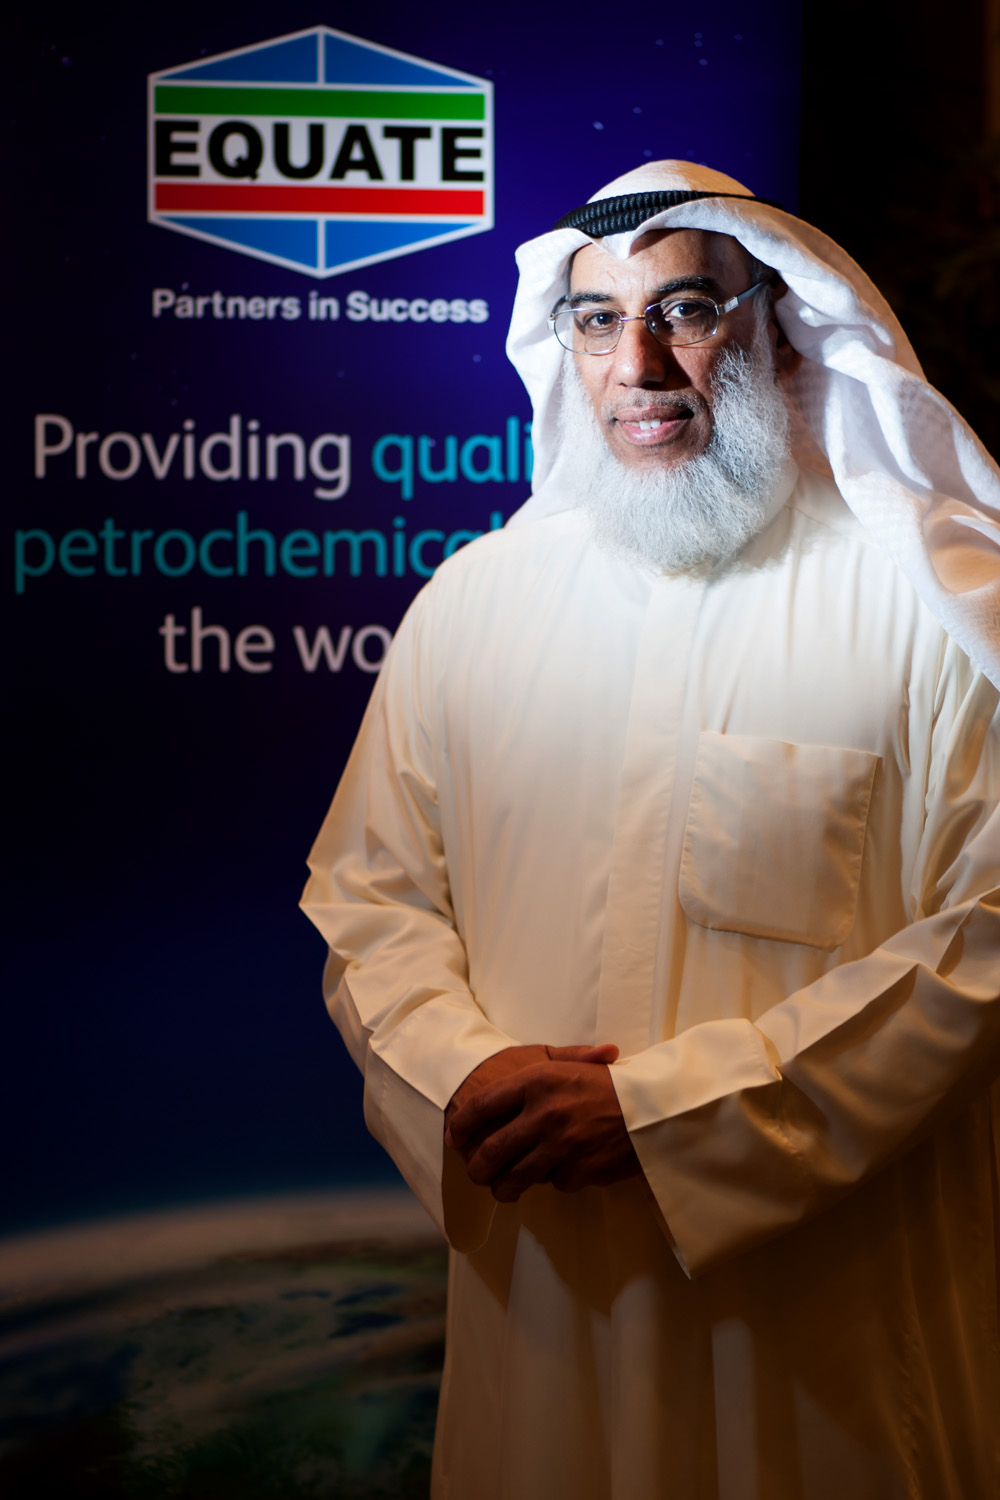 President and CEO of EQUATE Petrochemical Company Mohammad Husain